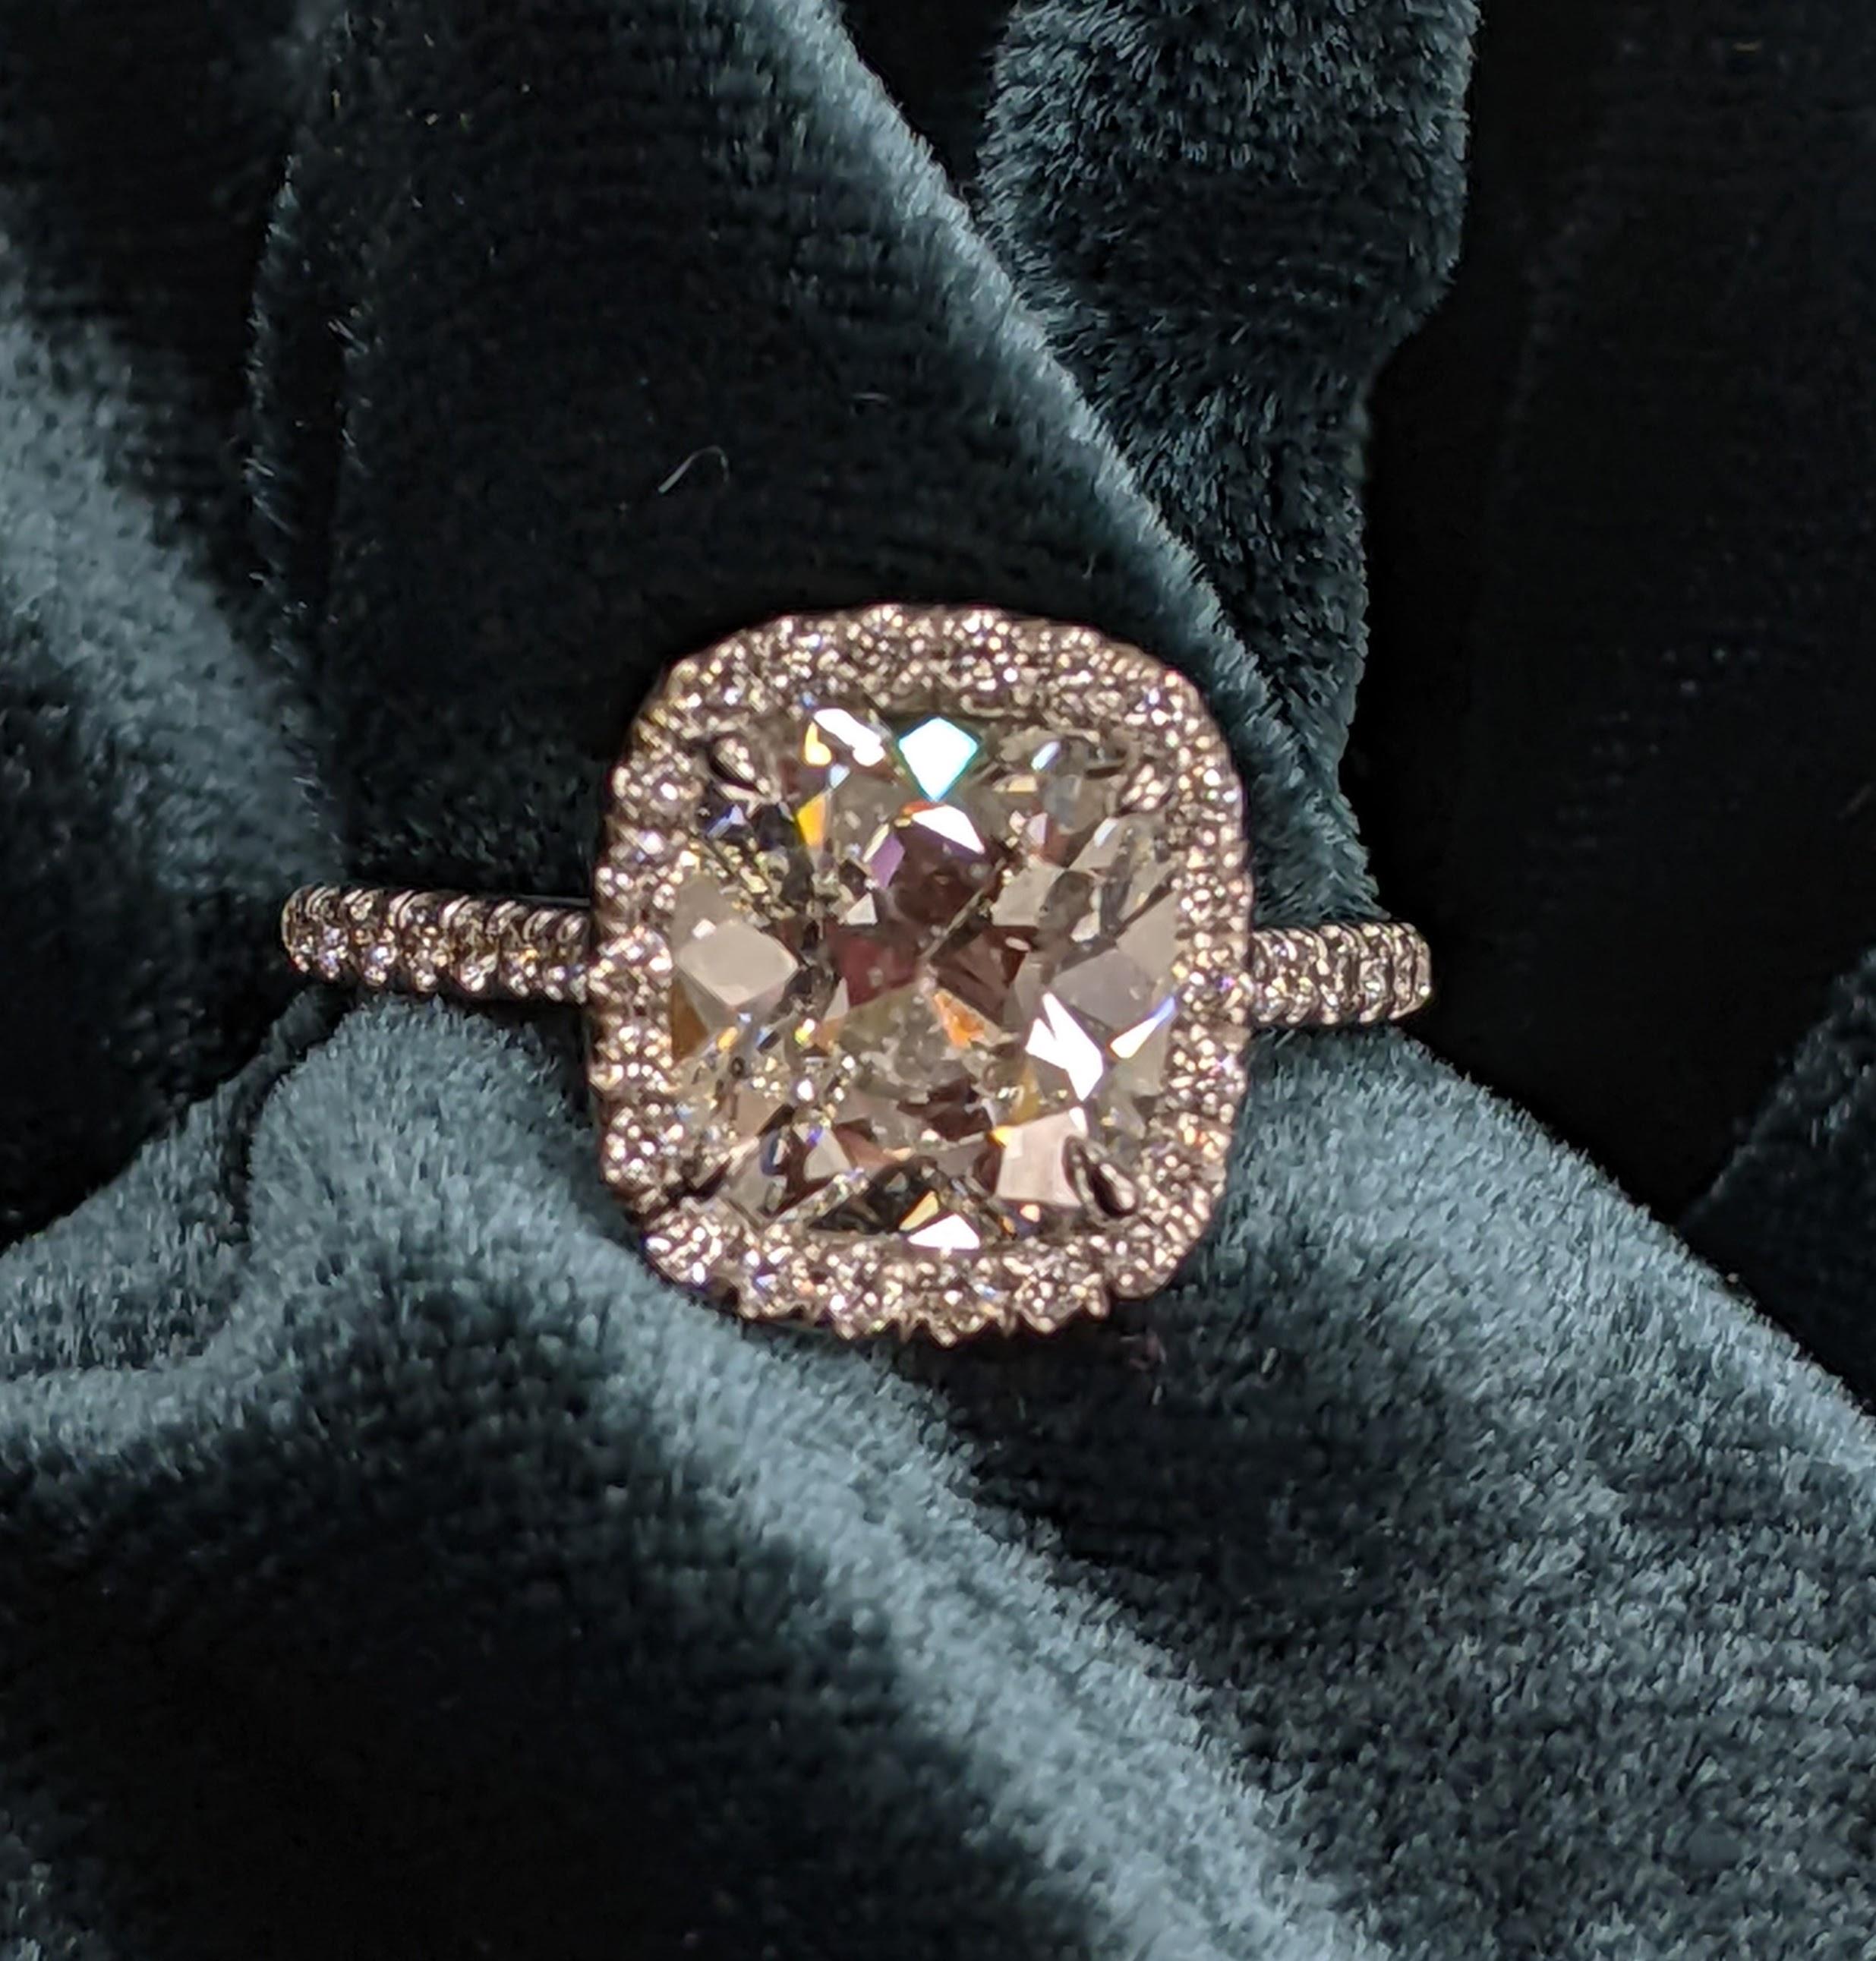 2.73 Cushion Cut graded with a G color and SI-2 clarity (and eye clean to boot) from GIA.  This old miner-styled stone is surrounded by a halo of small diamonds which extends into the ring's 18KT White Gold mounting, totaling up to 38 small diamonds